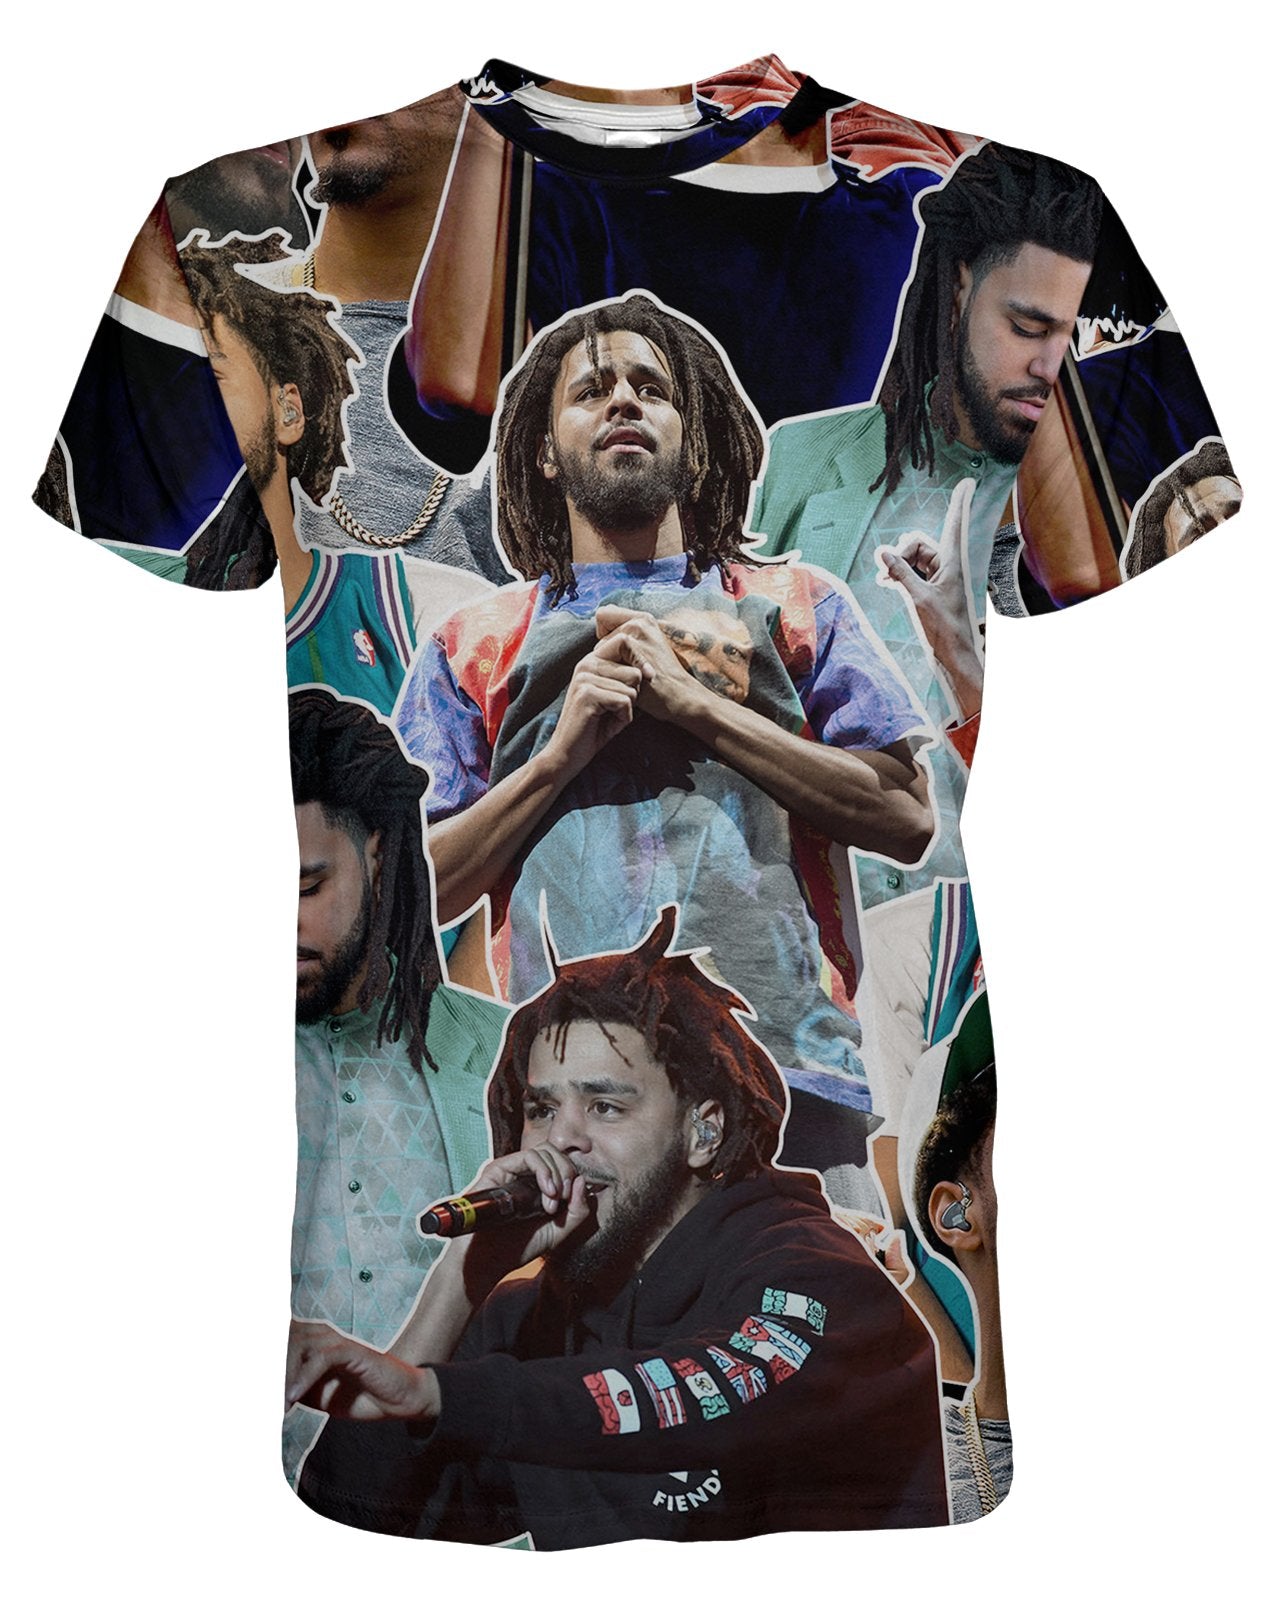 J Cole T-shirt | All Over Shirts 